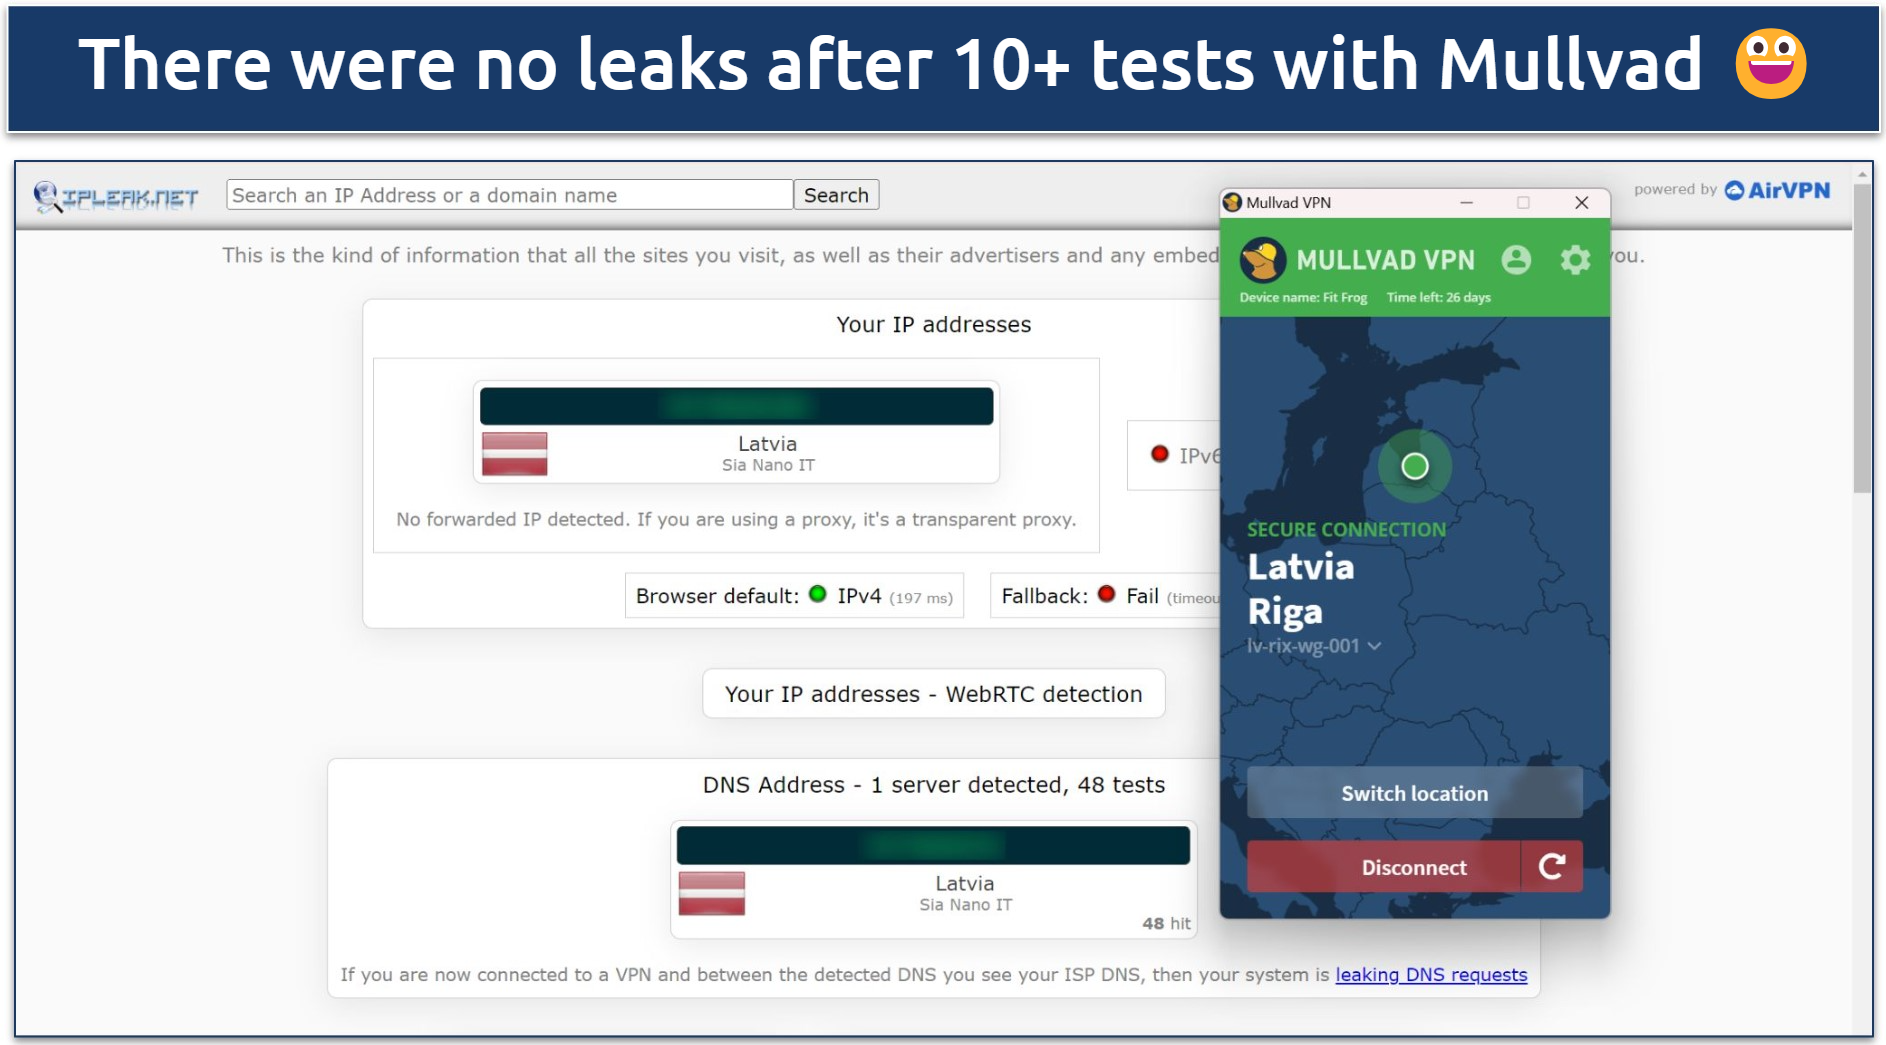 Screenshot of leak tests on ipleak.net done while connected to Mullvad's Latvia server